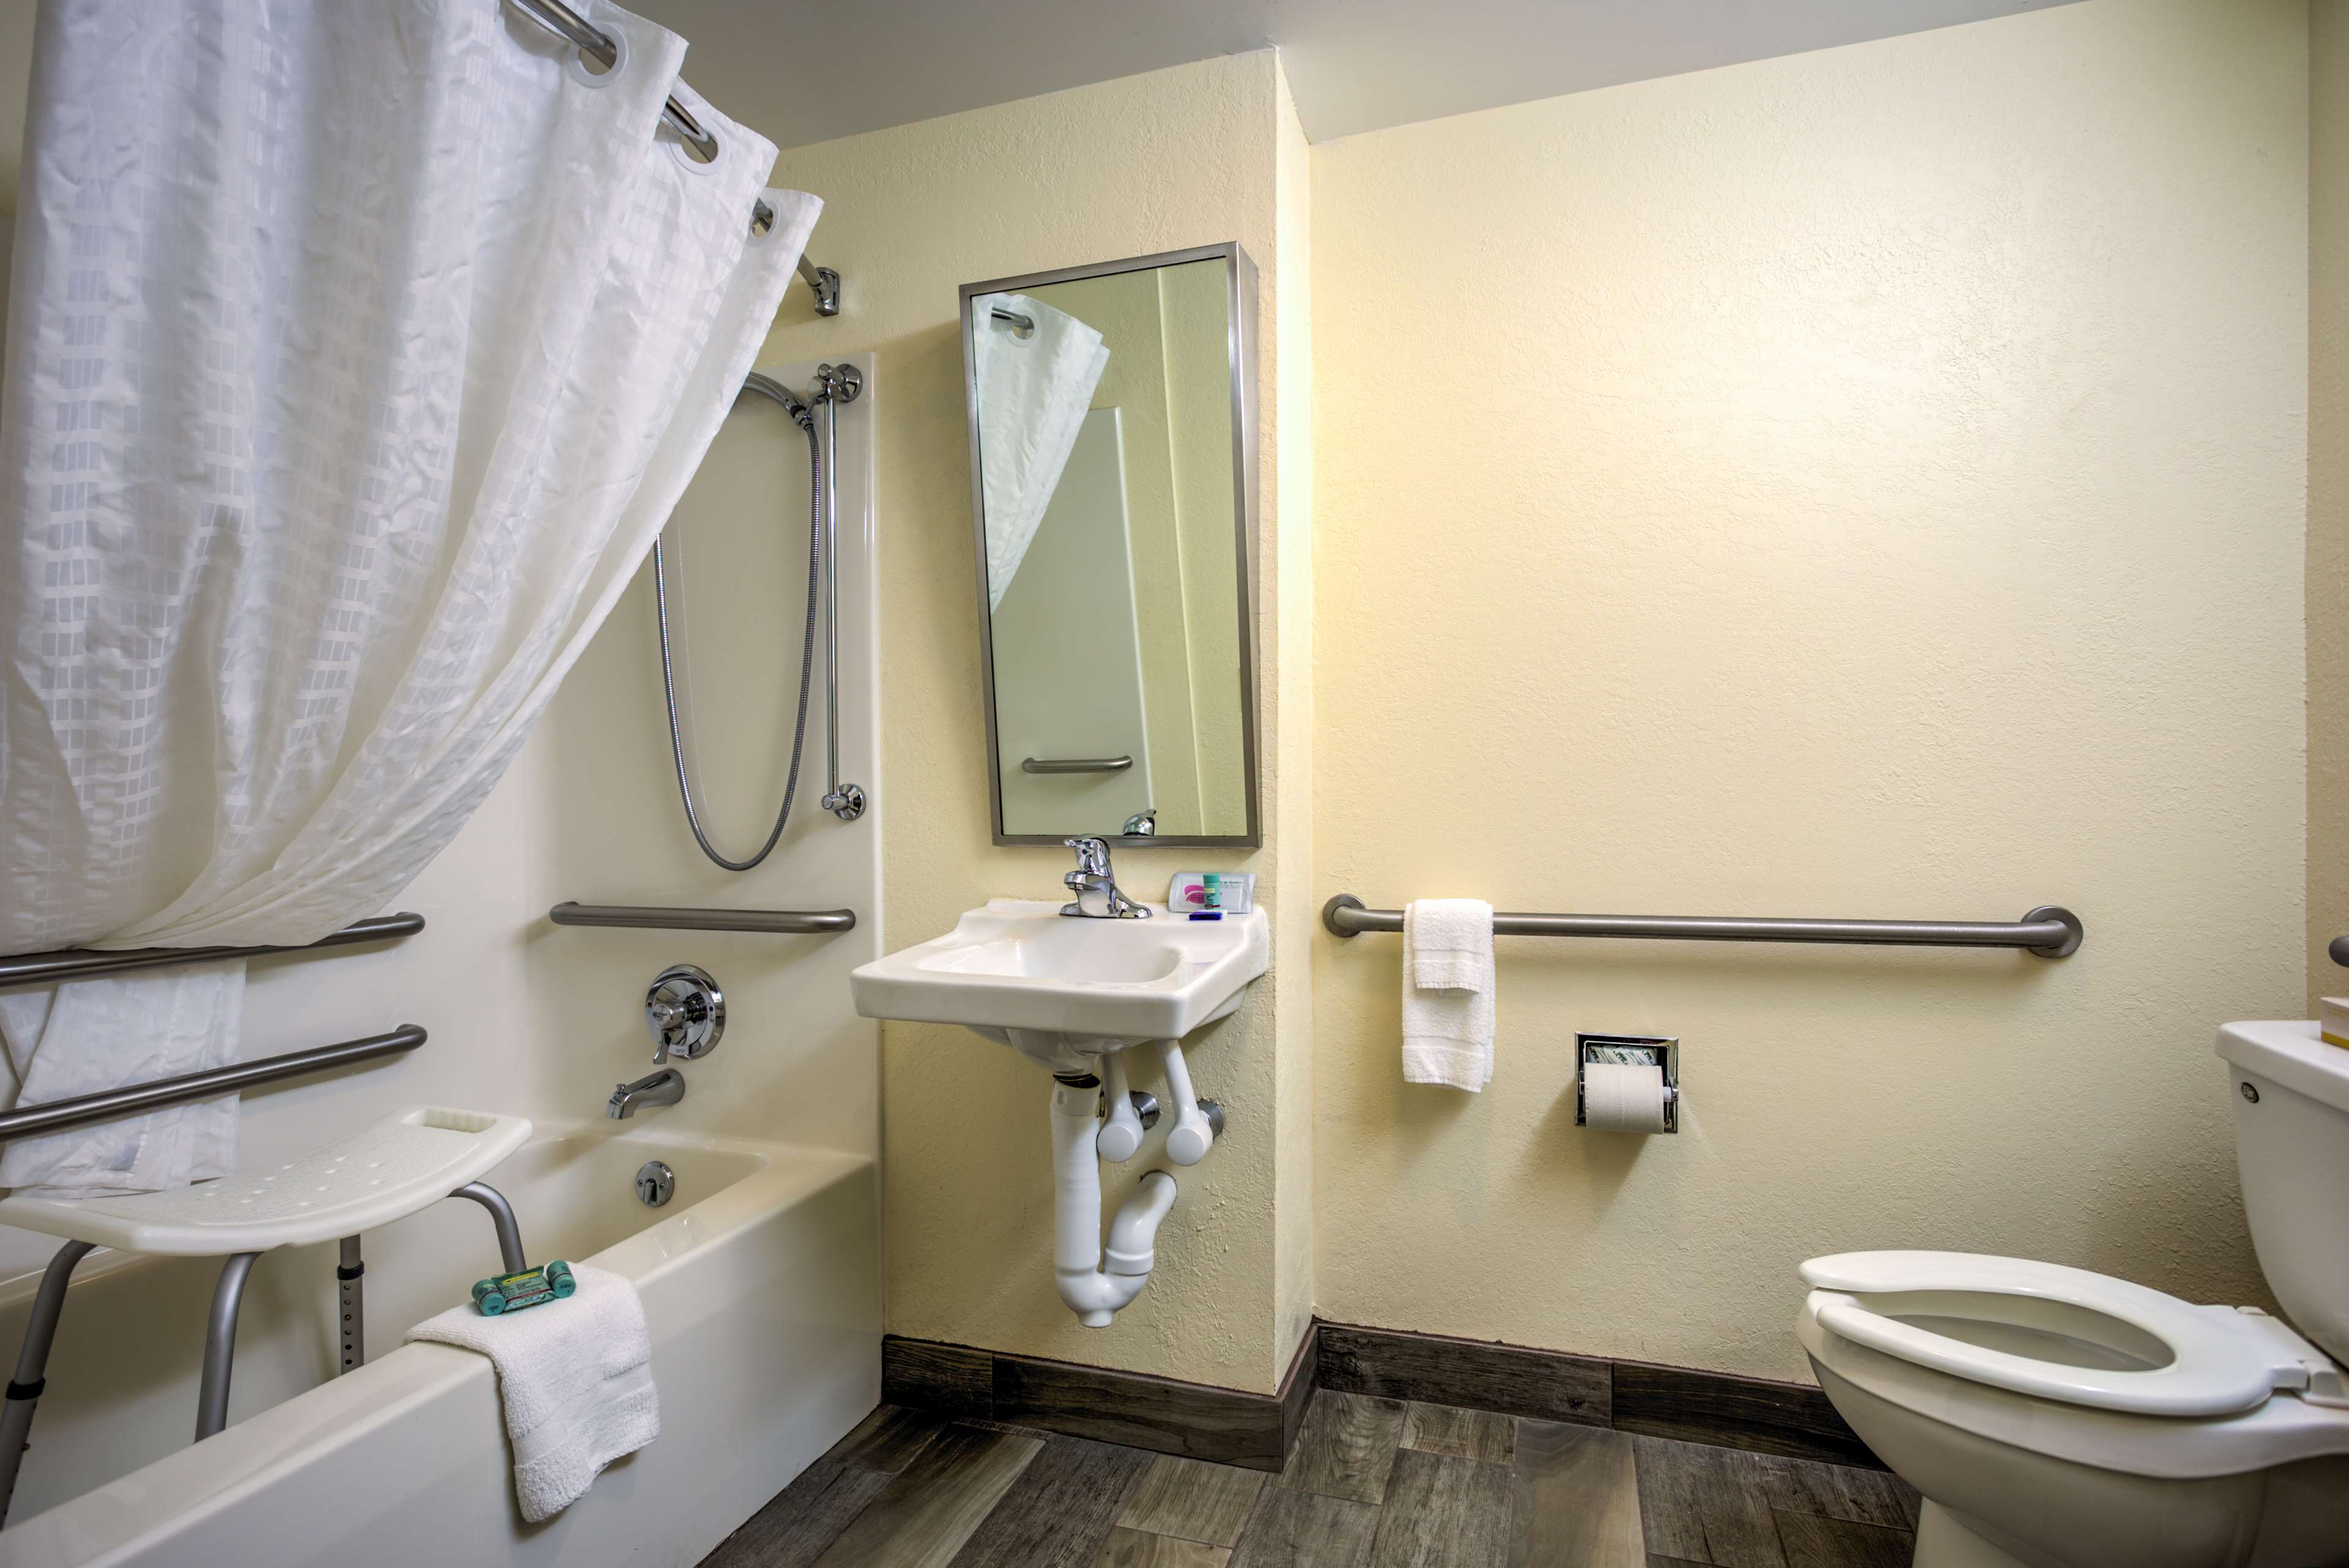 Accessibility matters, and our ADA guest rooms and bathrooms have physical features with safety in mind.